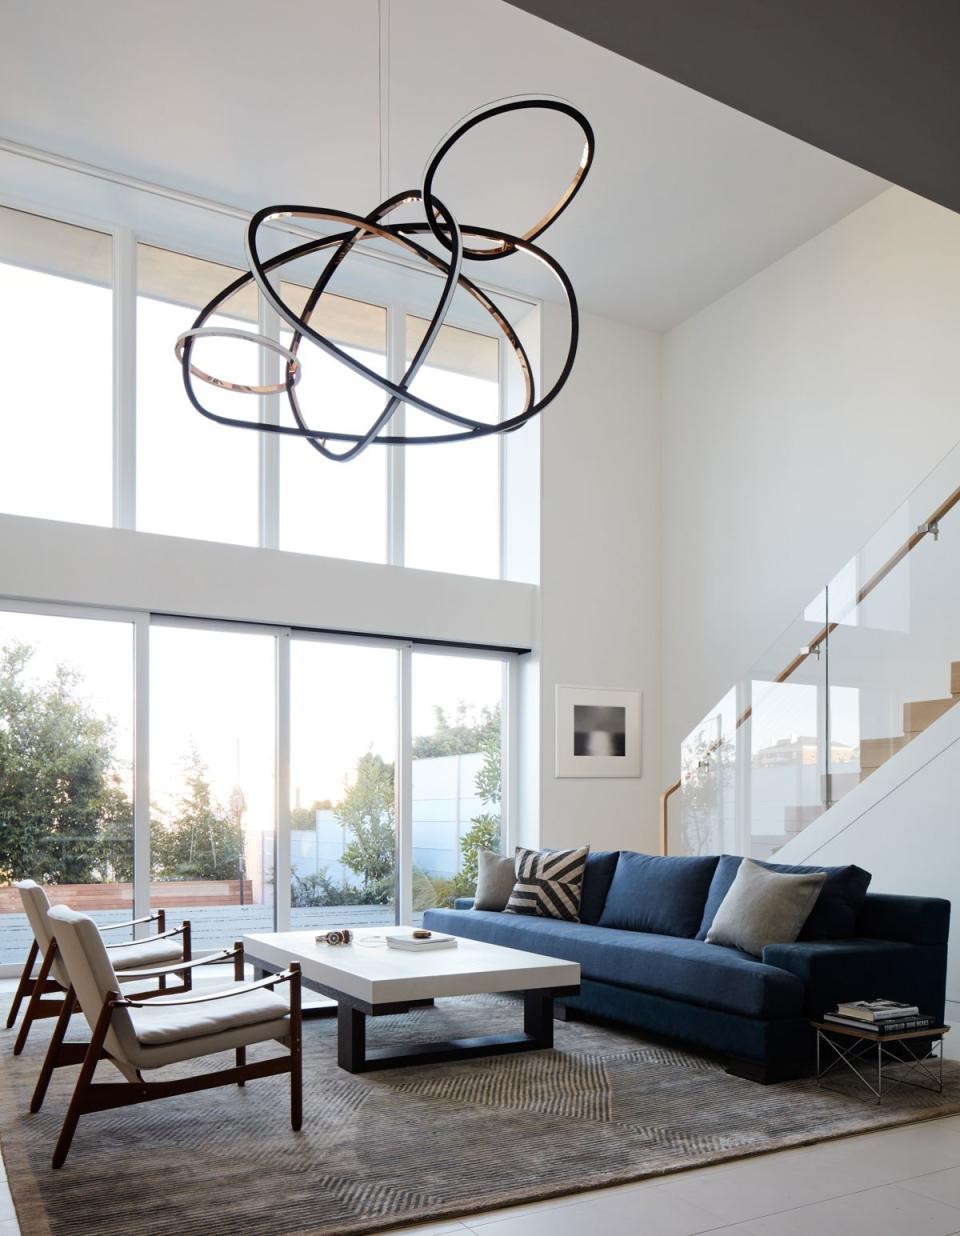 A curvaceous hanging light sculpture is the striking focal point in the lower-level family room, a casual spot for the kids to watch TV, play ping-pong, and relax. The bespoke piece, created by Irish artist Niamh Barry, was specifically designed to fit the room’s dimensions. “It really came to life in the space, and it looks so pretty from outside the house as well,” Kwong says.